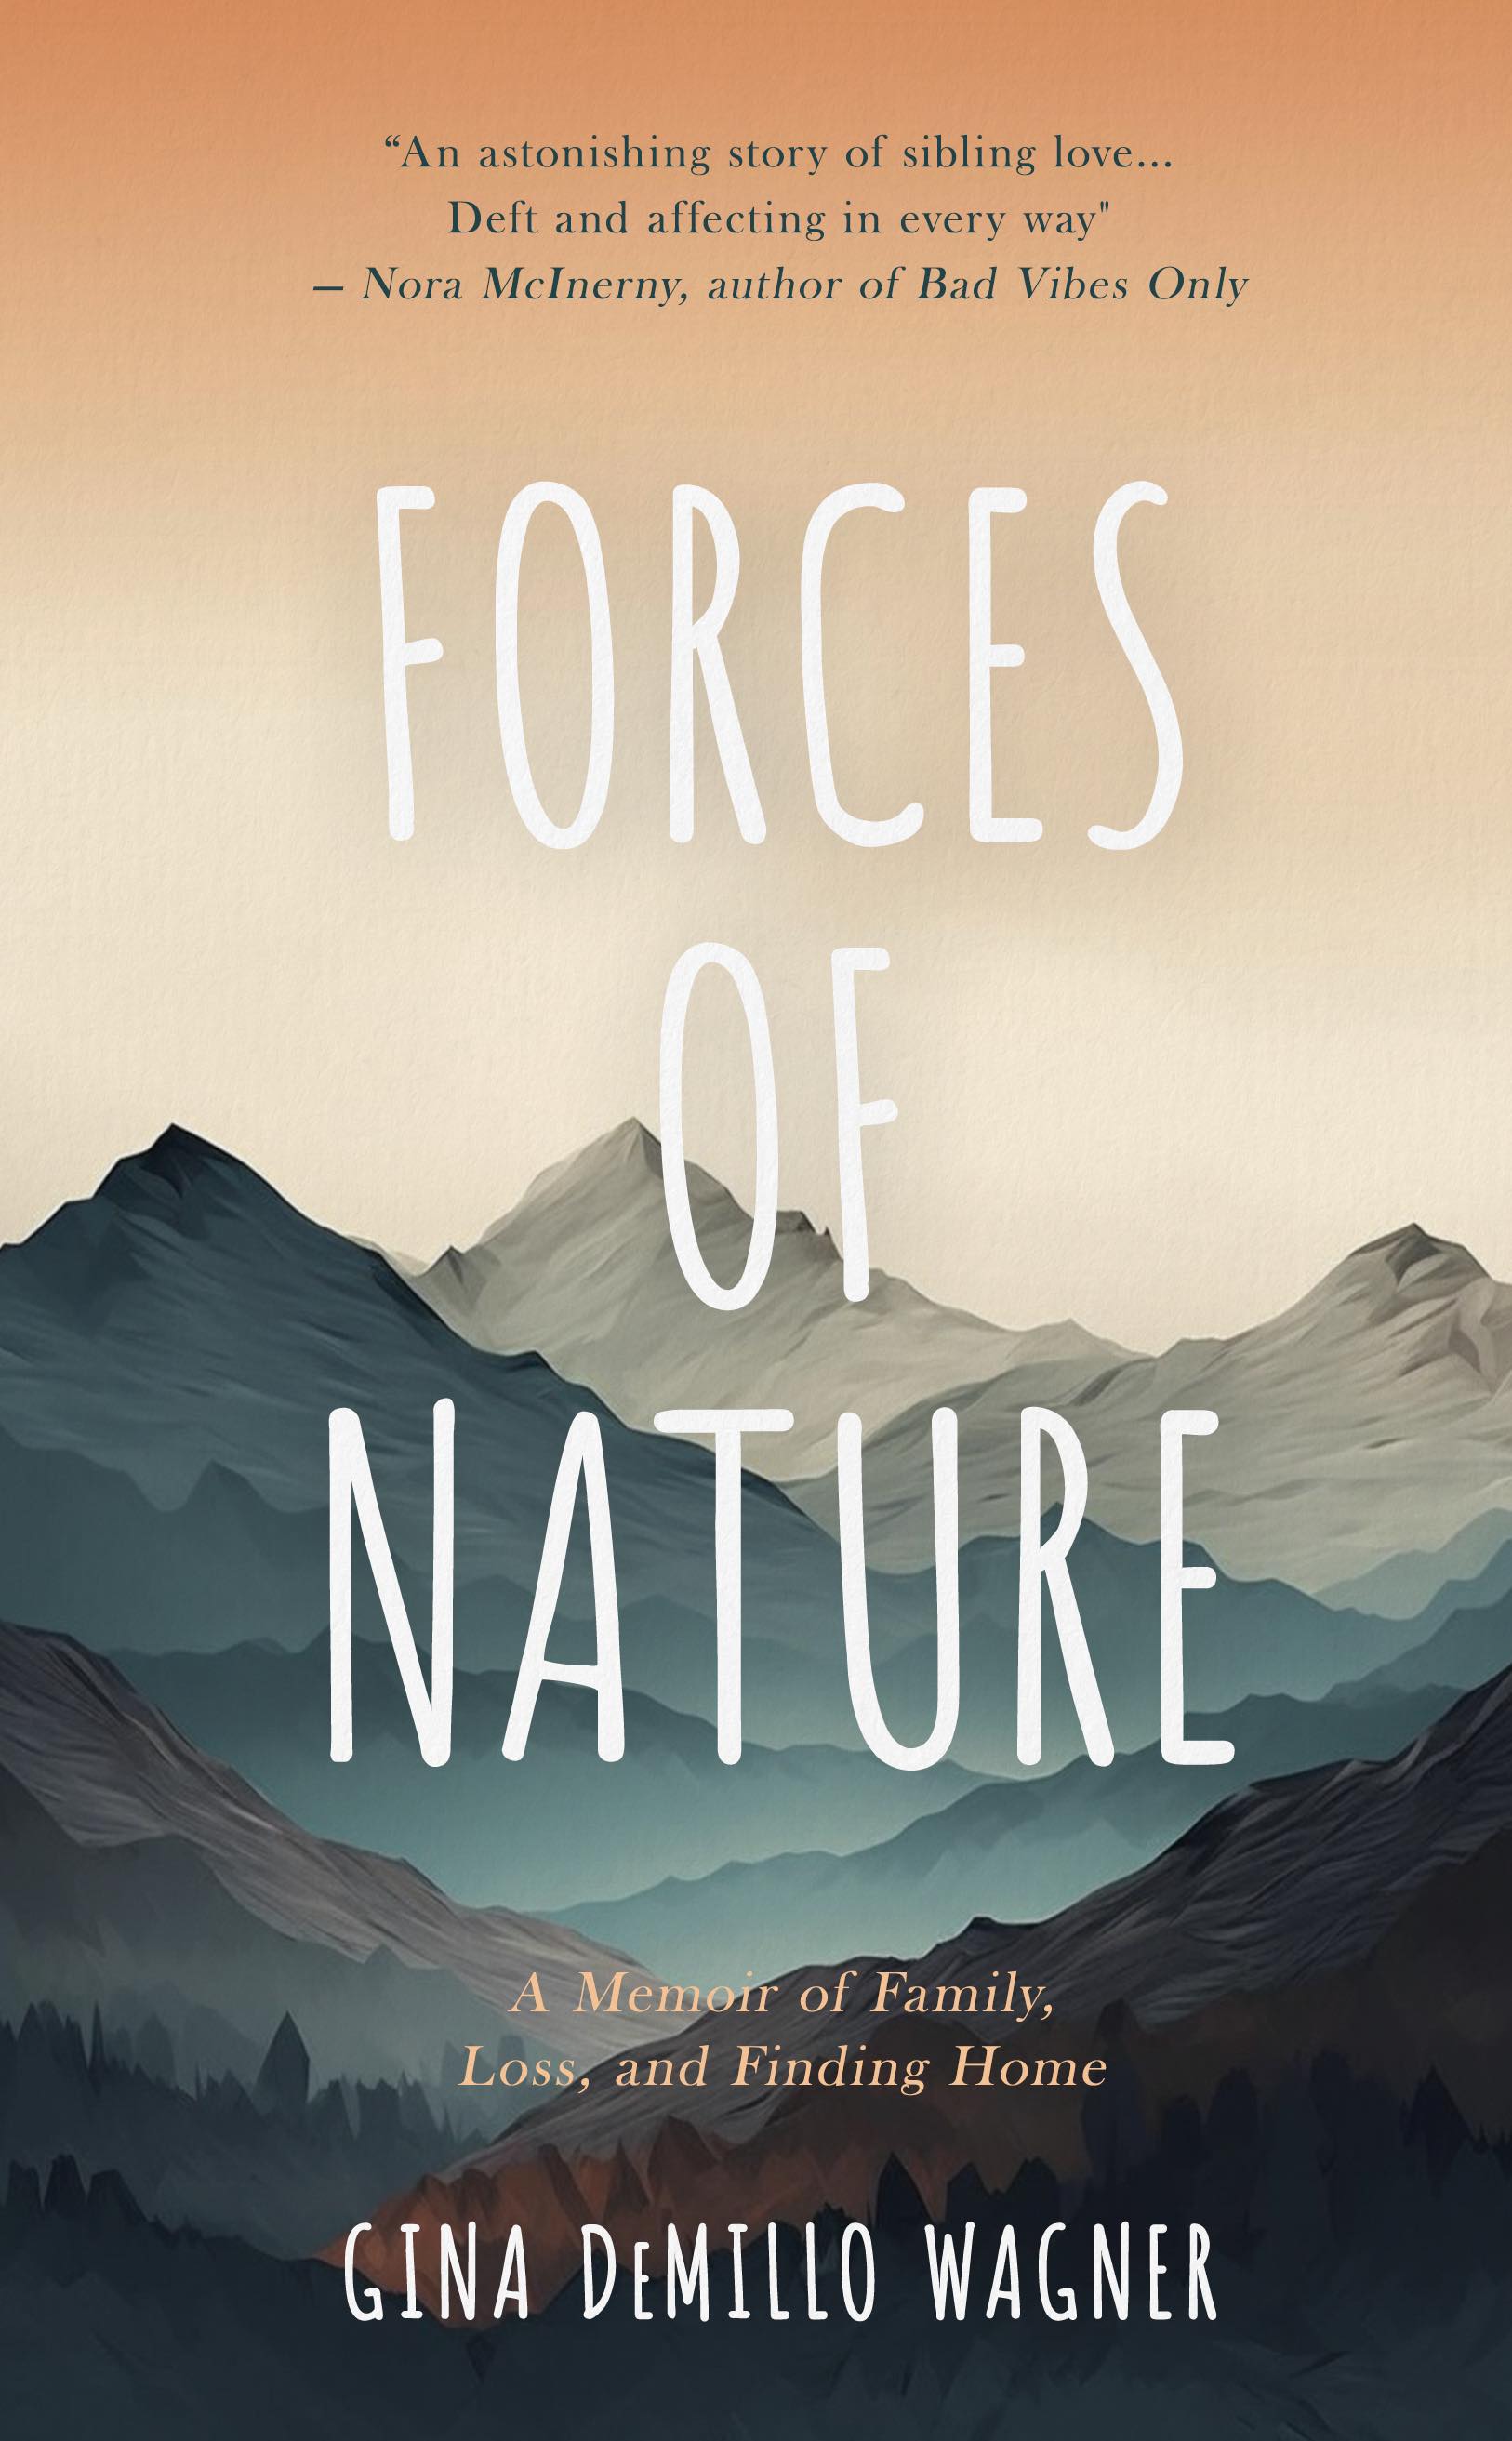 Image of book cover with mountain scenery and words Forces of Nature